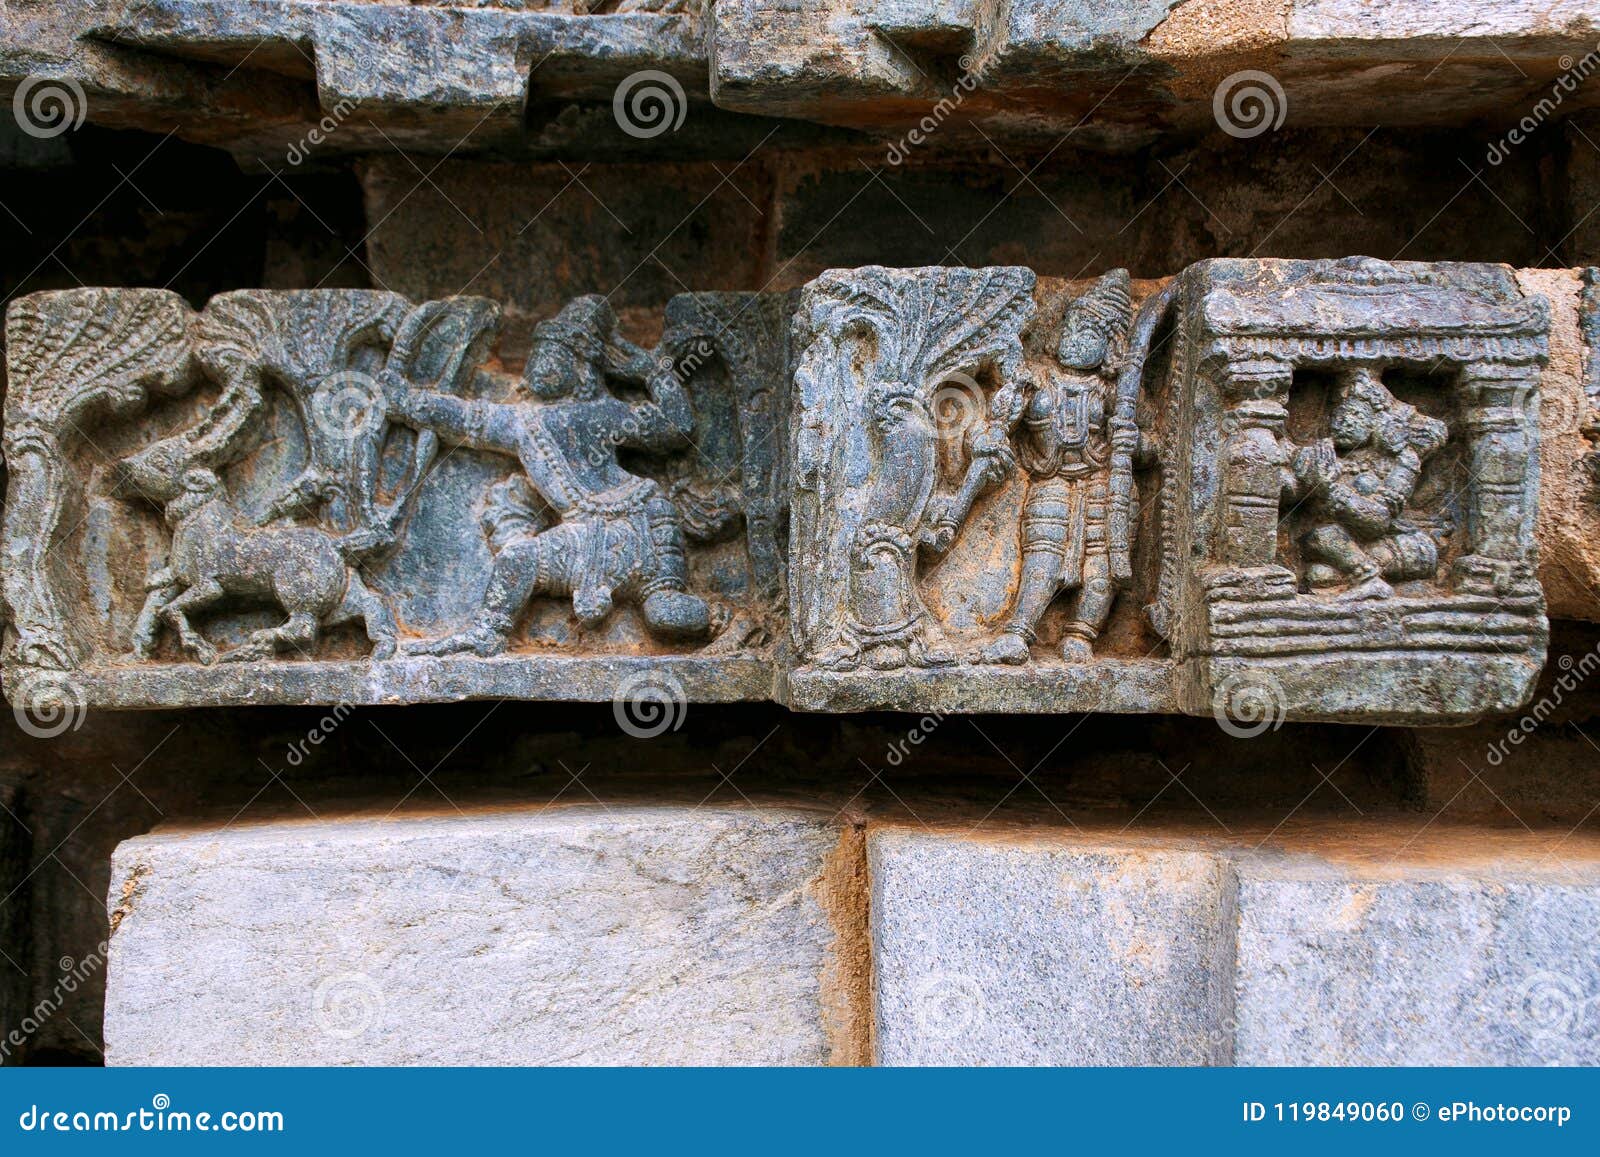 laxmana leaving sita in the kuti, rama shooting arrow at goden deer, suvarna mriga, carved on the friezes at the base of temple. k